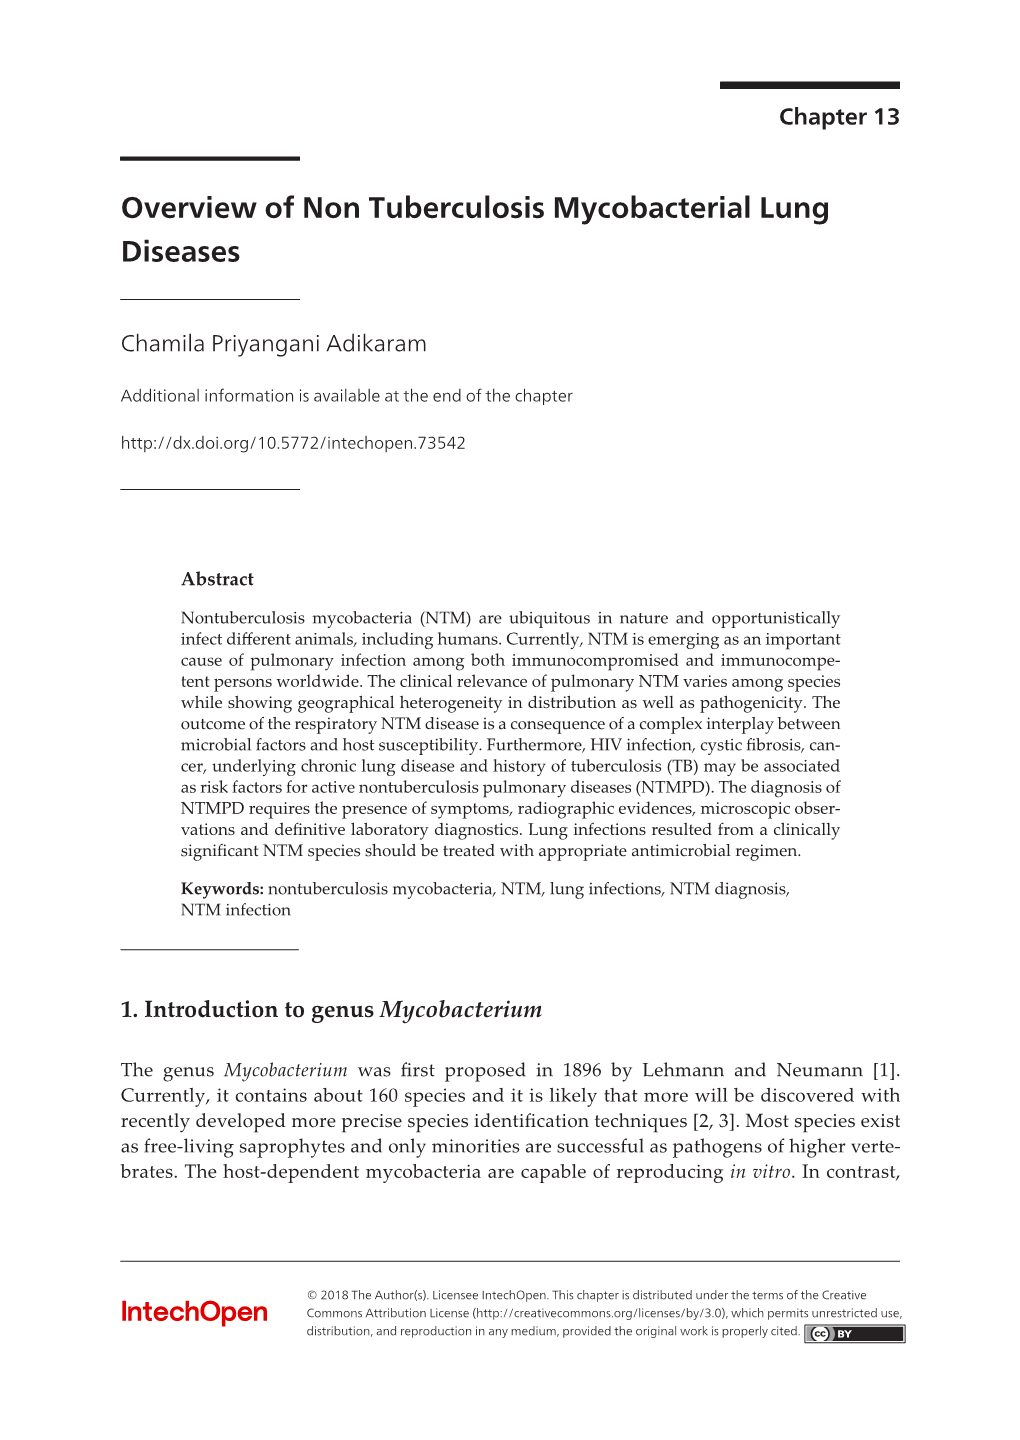 Overview of Non Tuberculosis Mycobacterial Lung Diseases